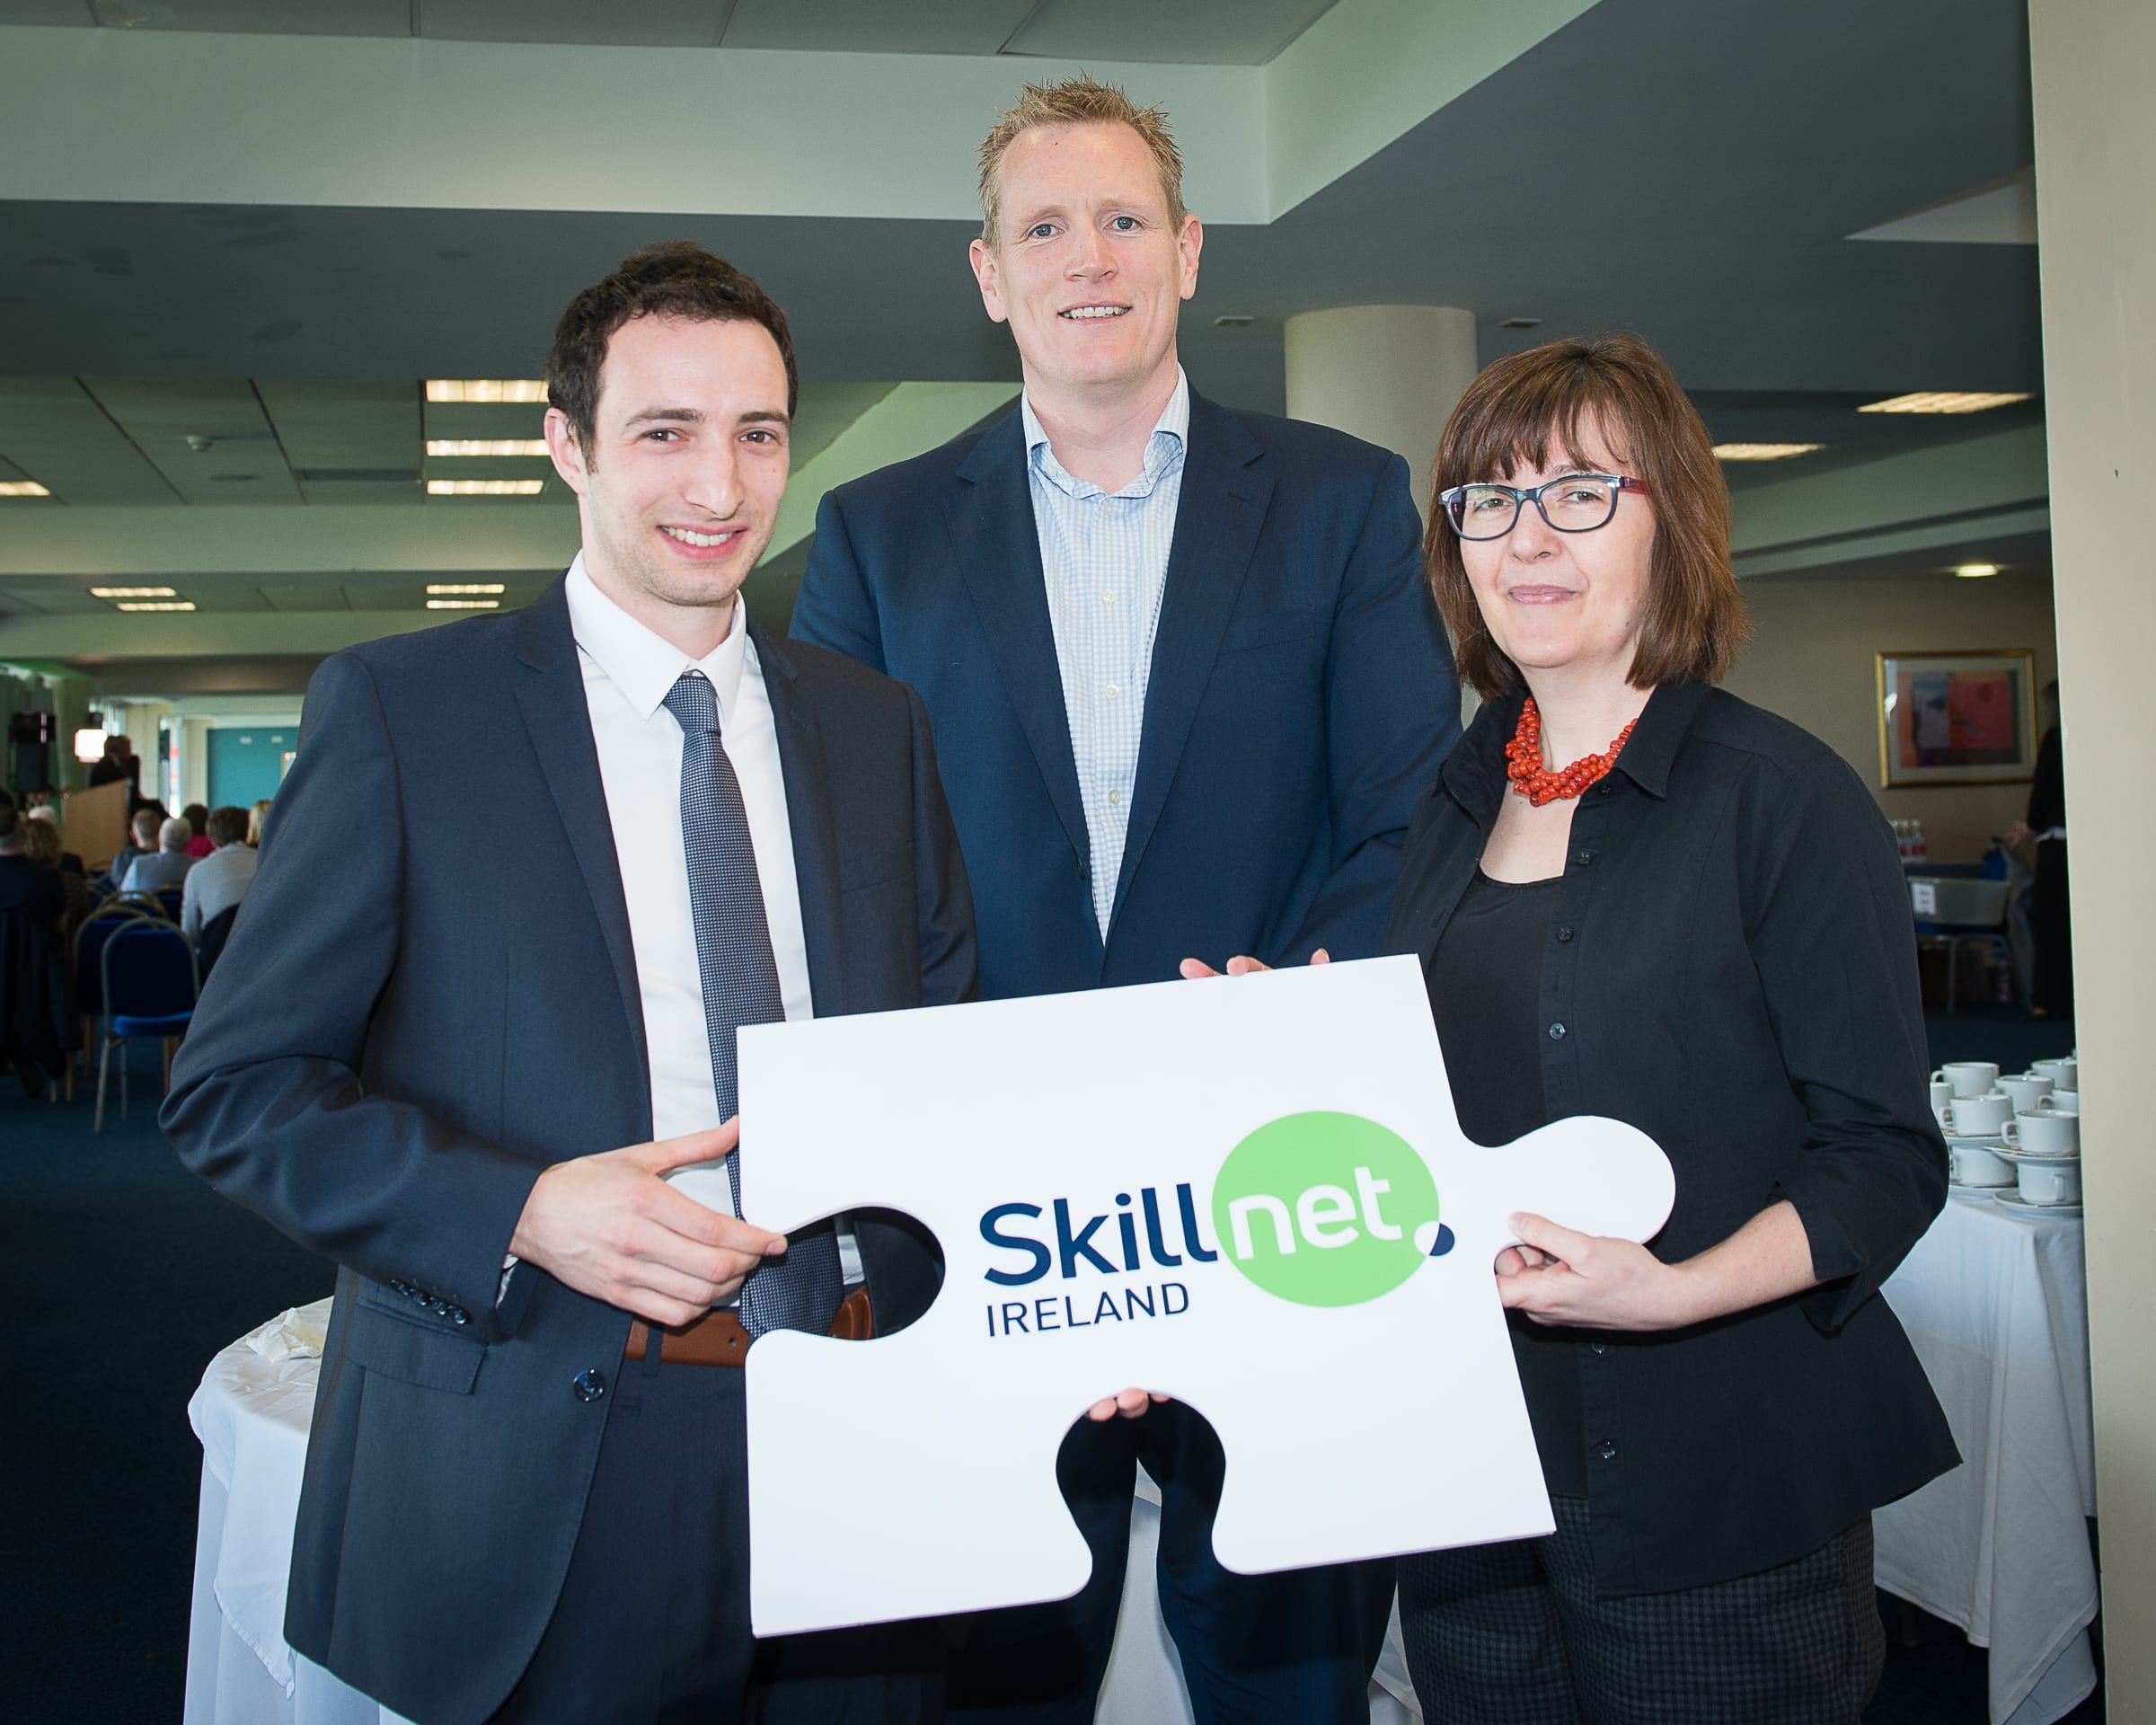 From Left to Right:  Upskilling the MidWest with John Kiely which took place on the 30th April in function room of the Limerick Racecourse: Cillian Griffey - Shannon Chamber  Skillnet, Dave Fitzgibbon - Collins McNicholas, Gráinne Walsh - ICBE Skillnet.